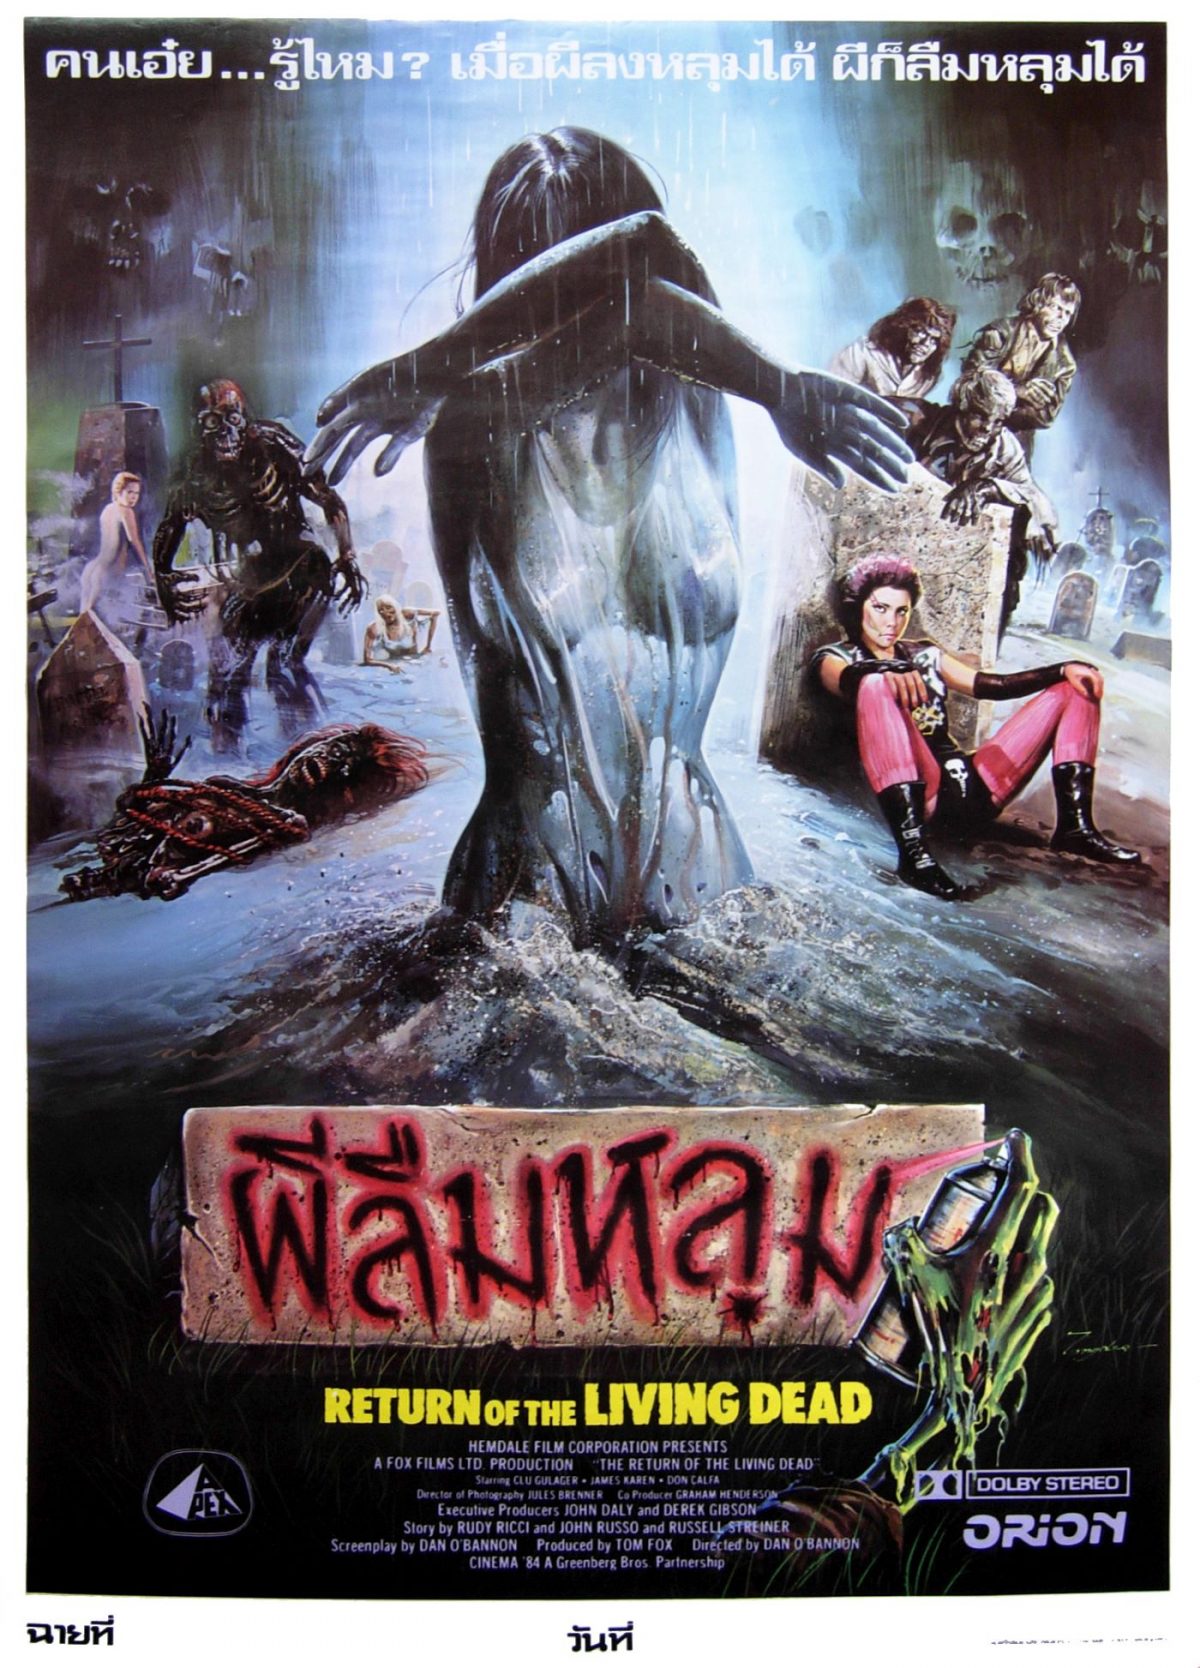 Thailand, movie posters, artwork, Return of the Living Dead